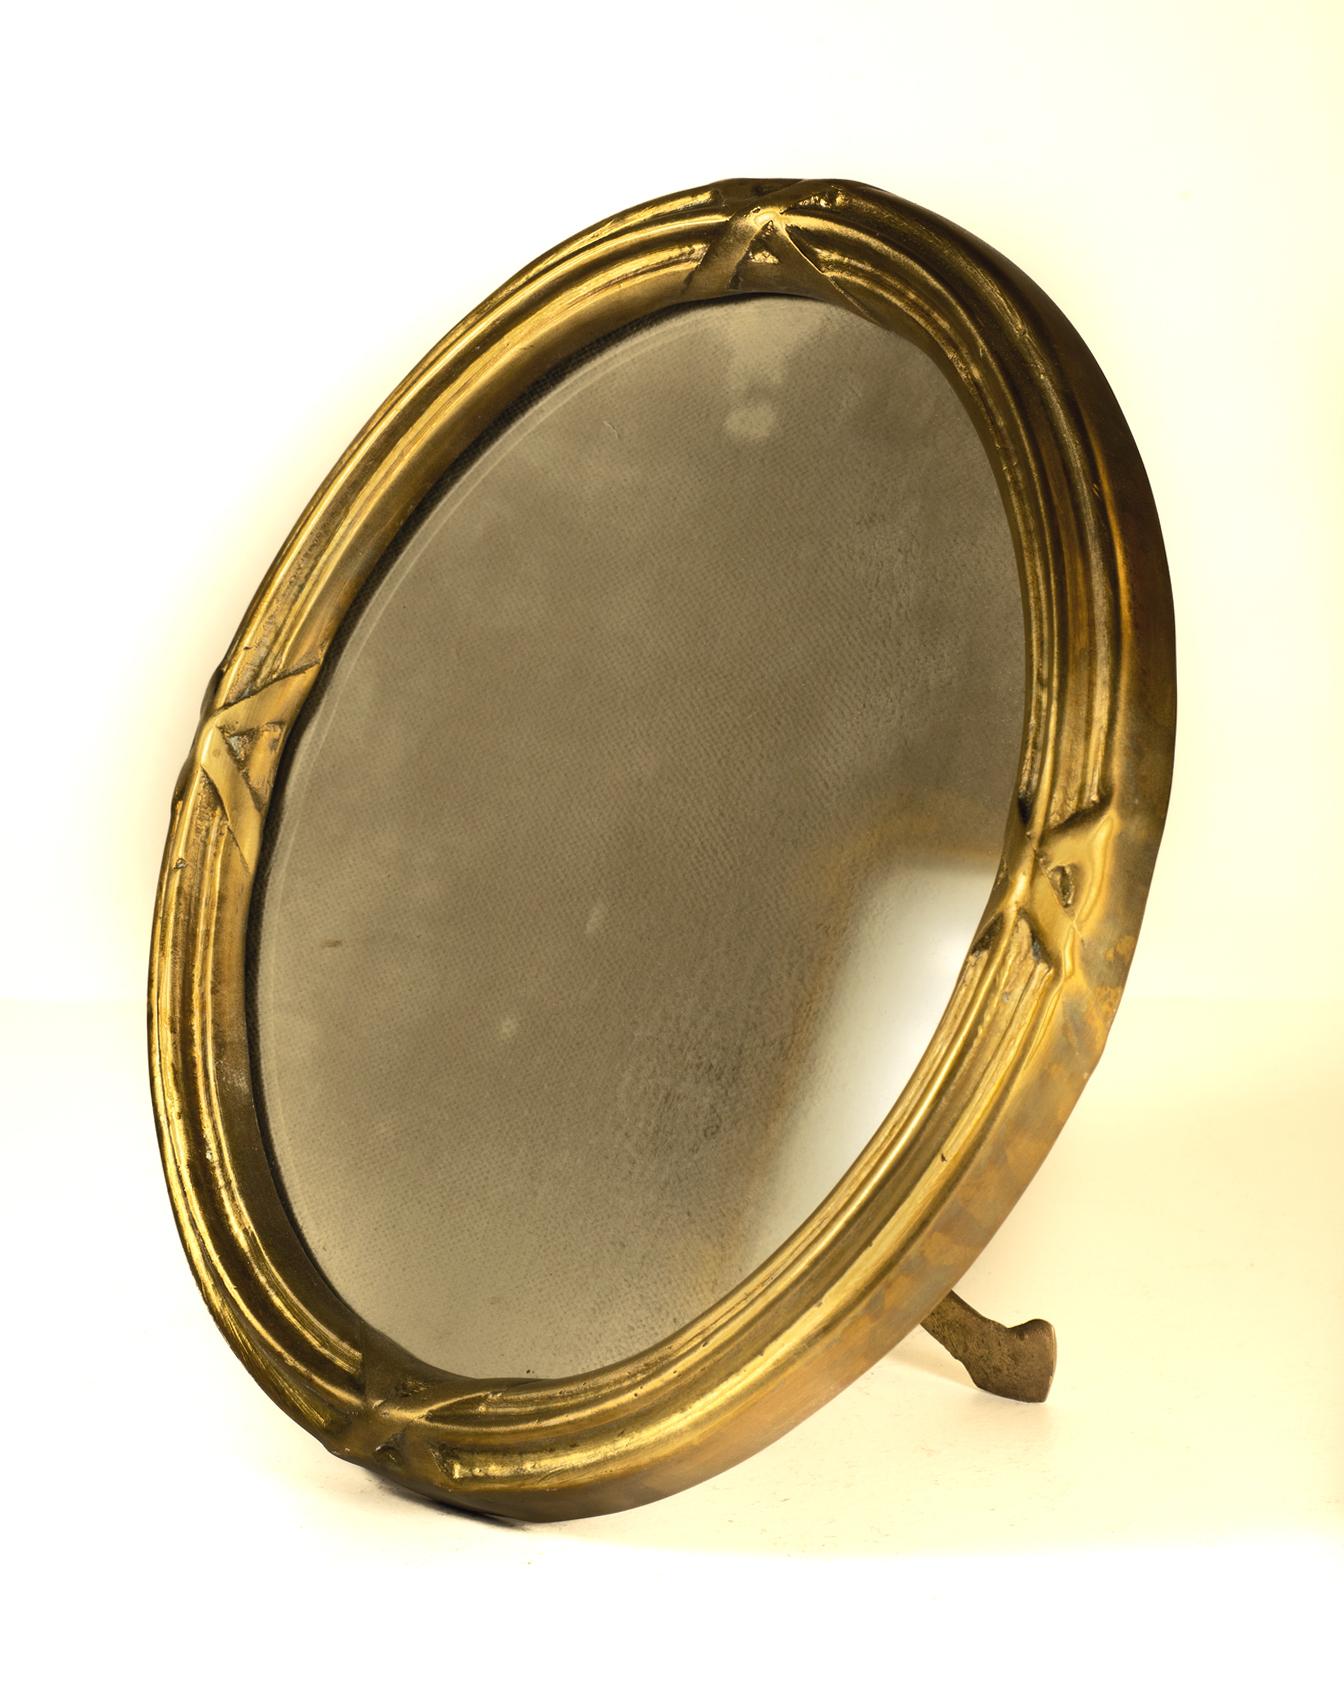 An antique decorative solid bronze photo/picture frame in classic Italian Liberty Style design circa 1900-1915. In good condition with natural patina.